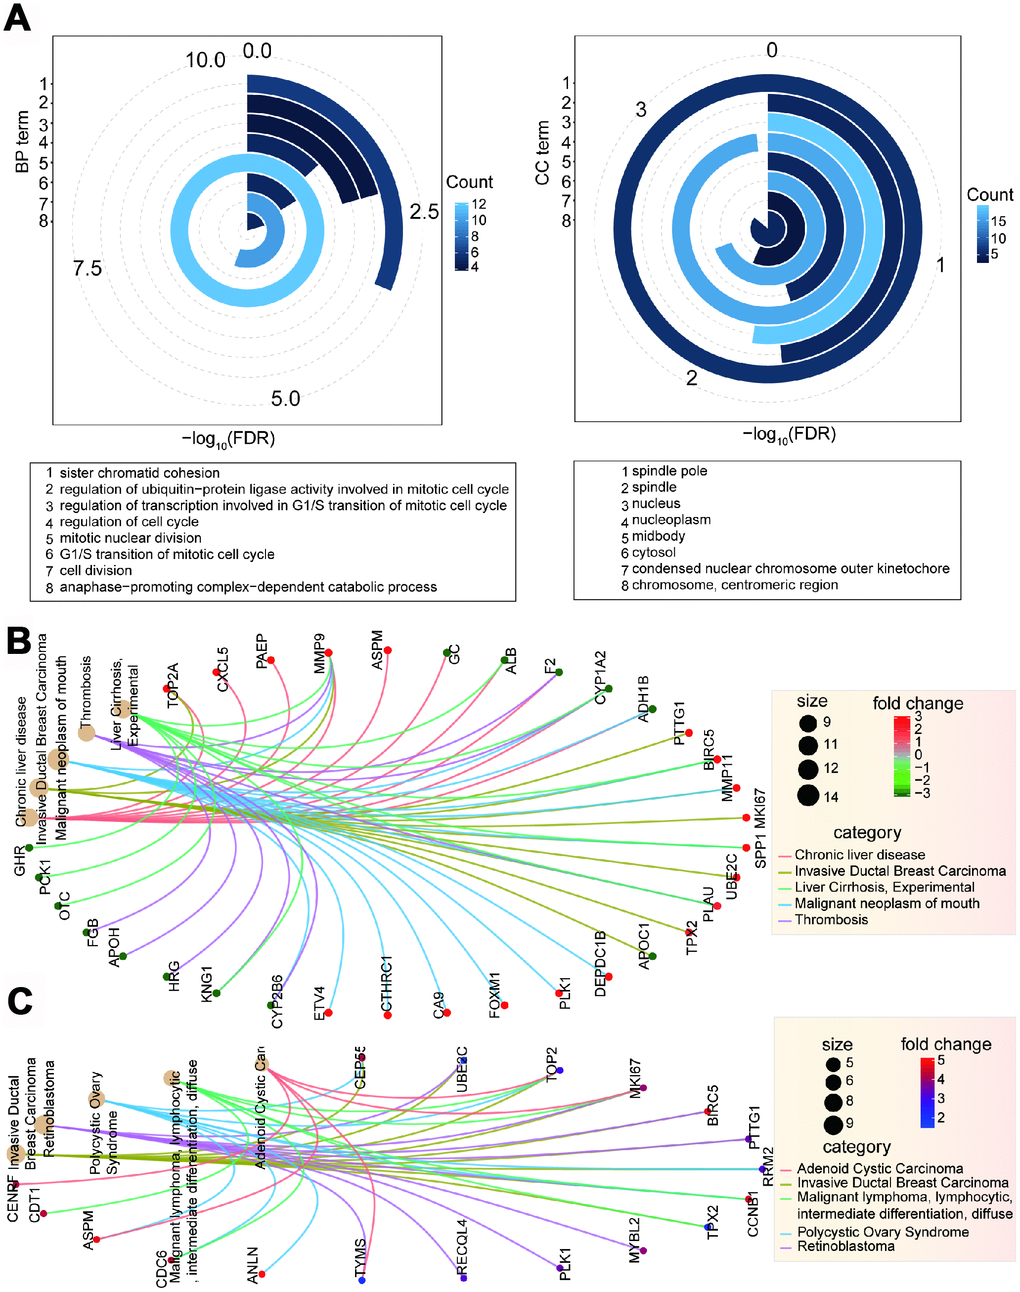 Function analysis of deregulated genes. (A) Enriched significant GO terms based on 26 candidate genes using David platform. (B) Enriched disease network of 94 deregulated genes.(C) Enriched disease network of screened 26 candidate genes.